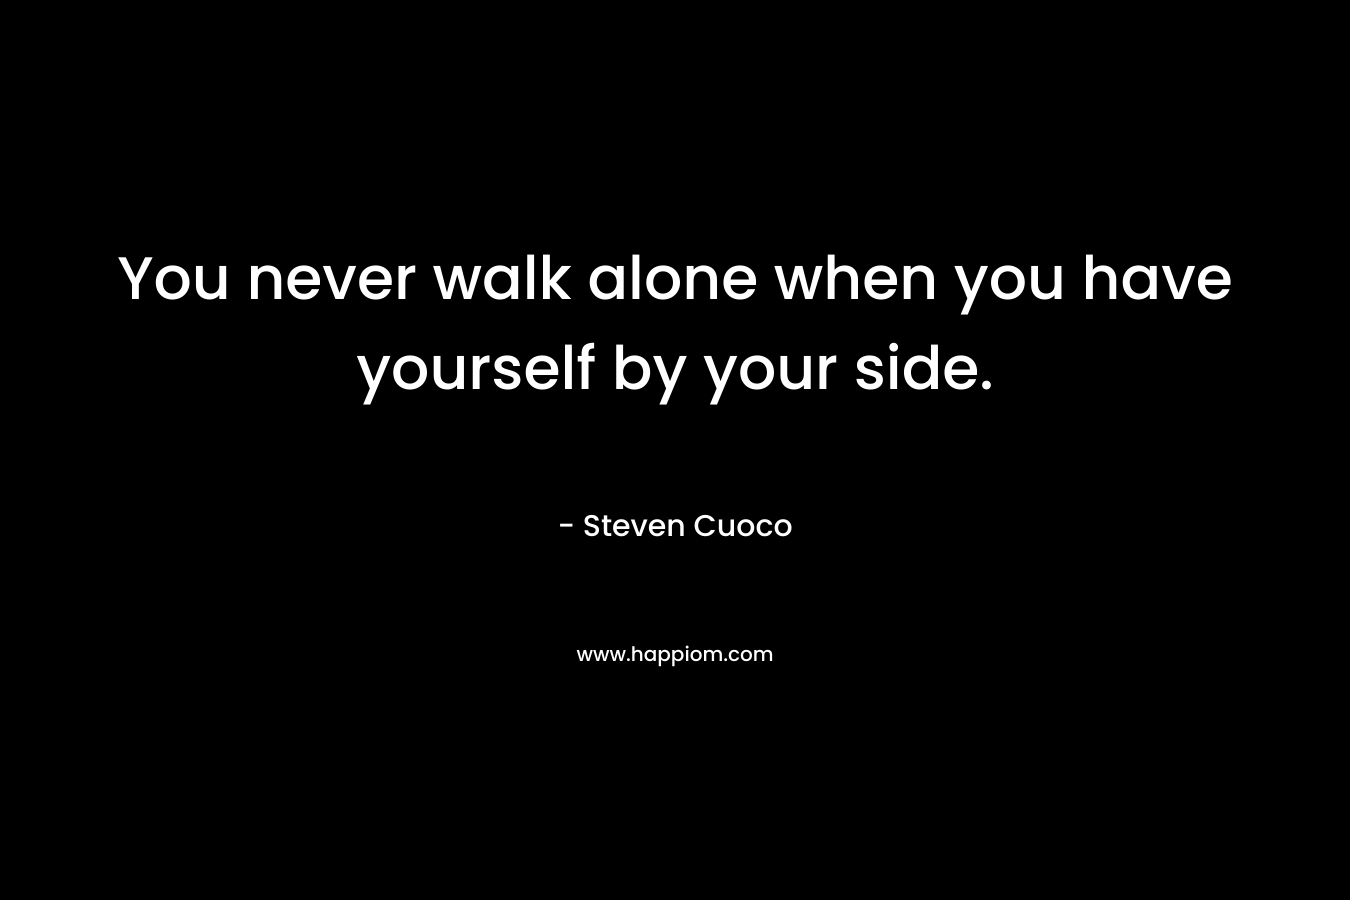 You never walk alone when you have yourself by your side.